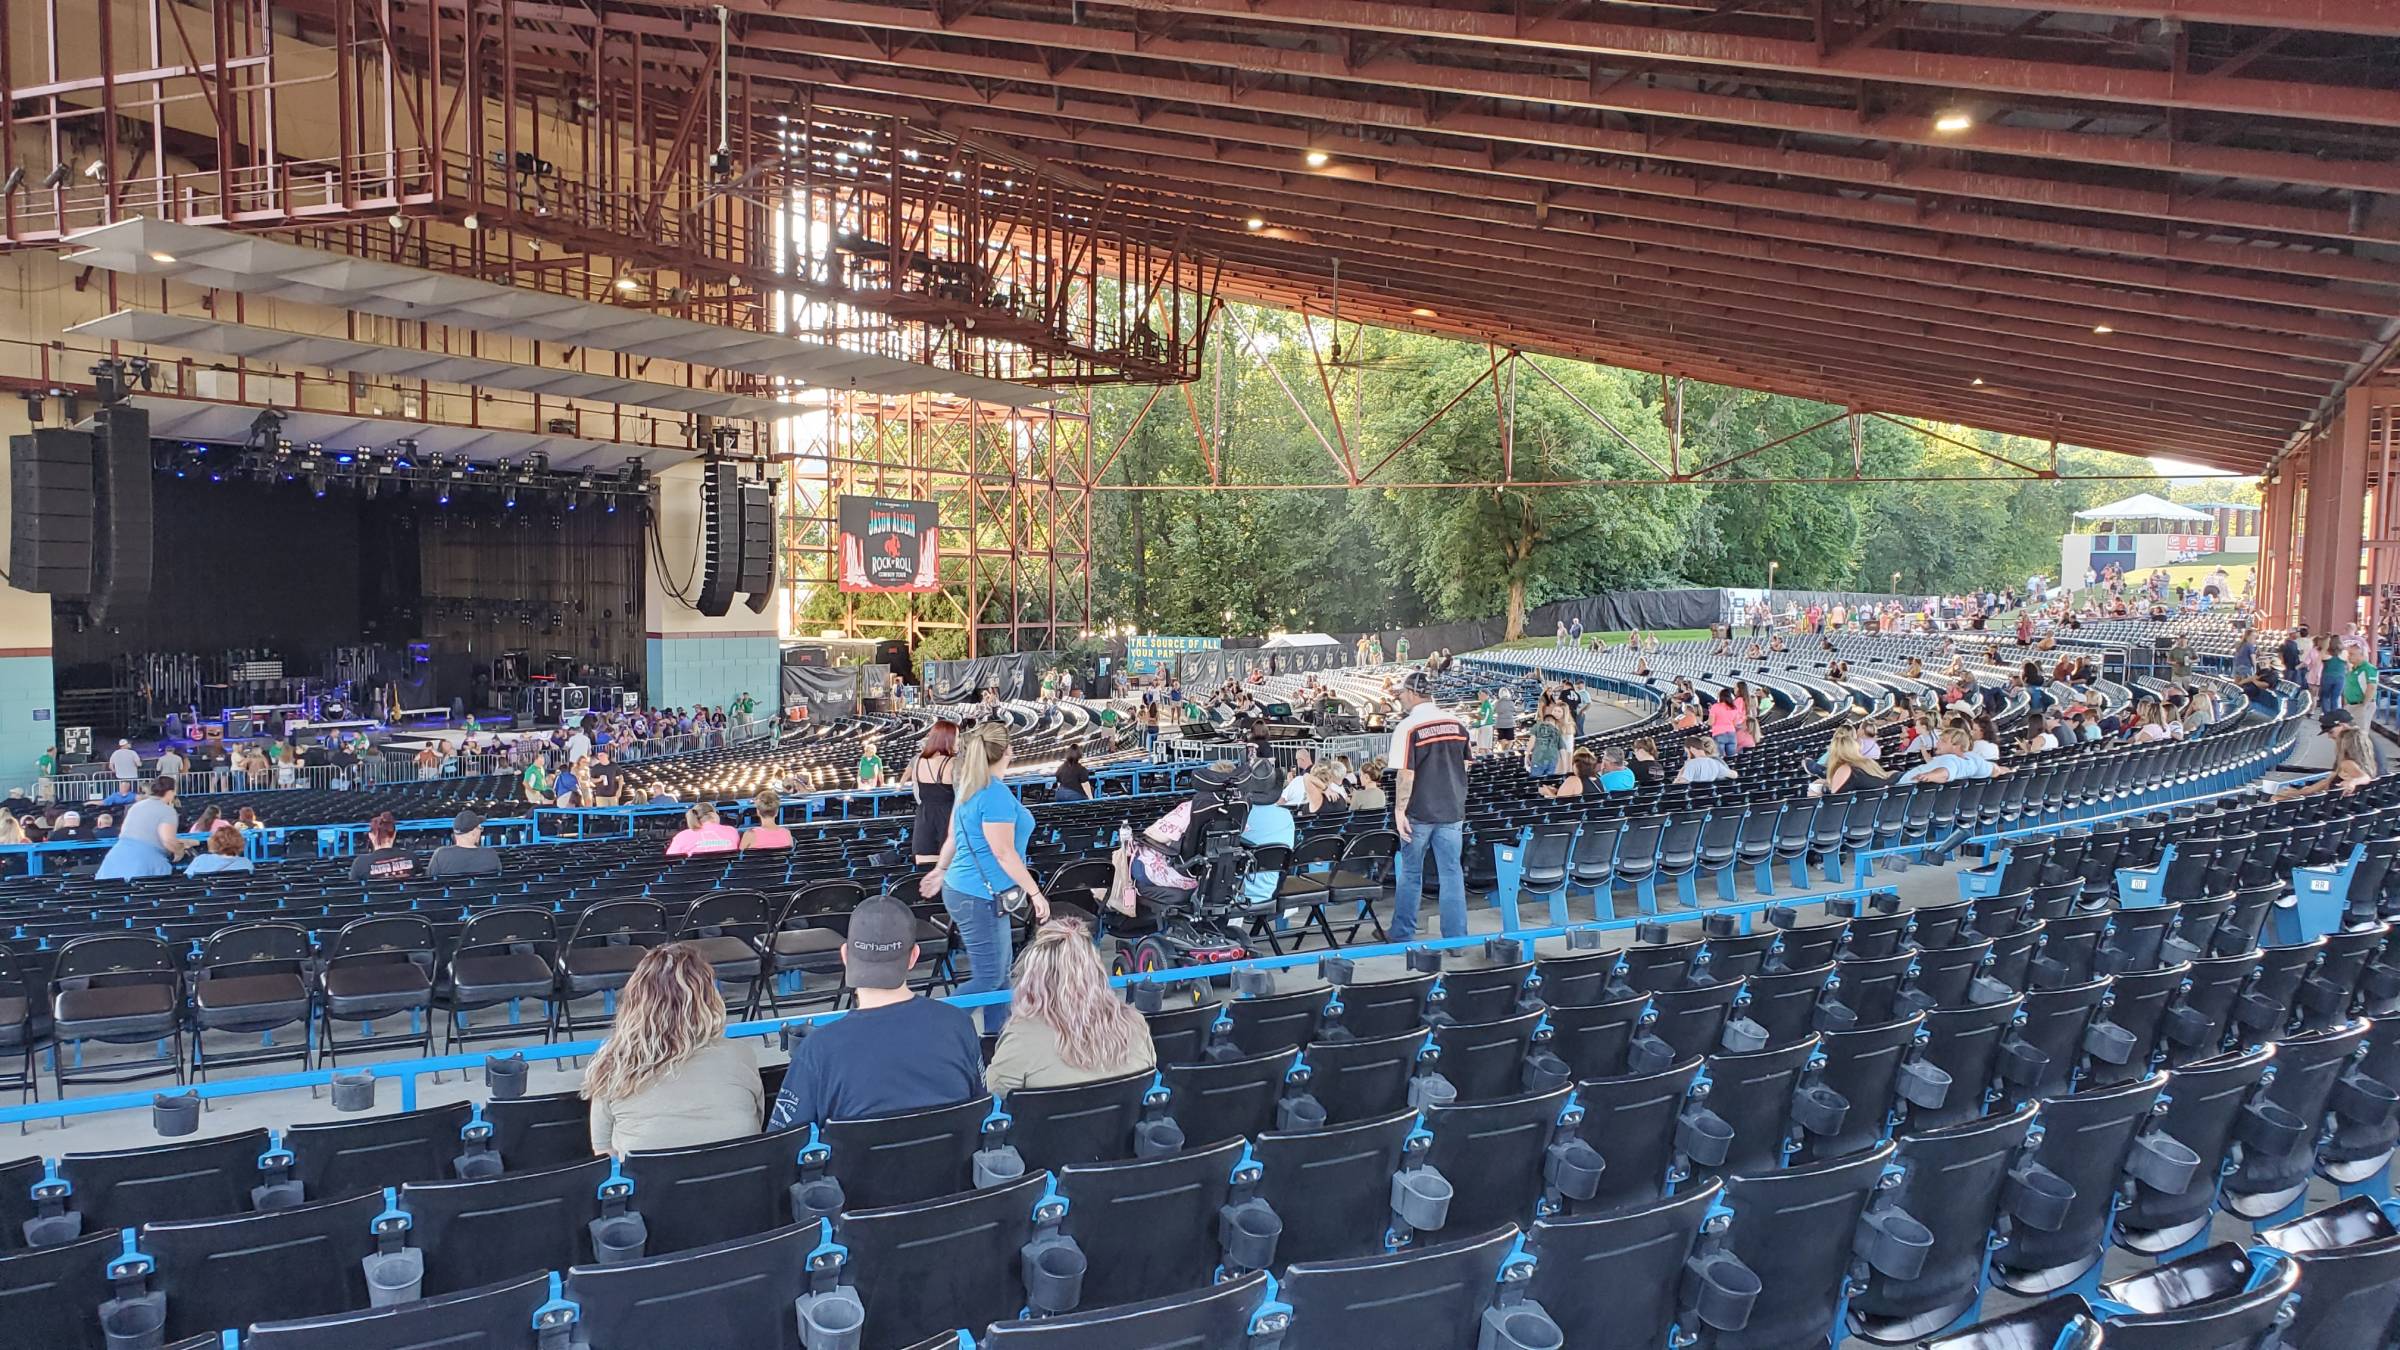 section-400-at-riverbend-music-center-rateyourseats